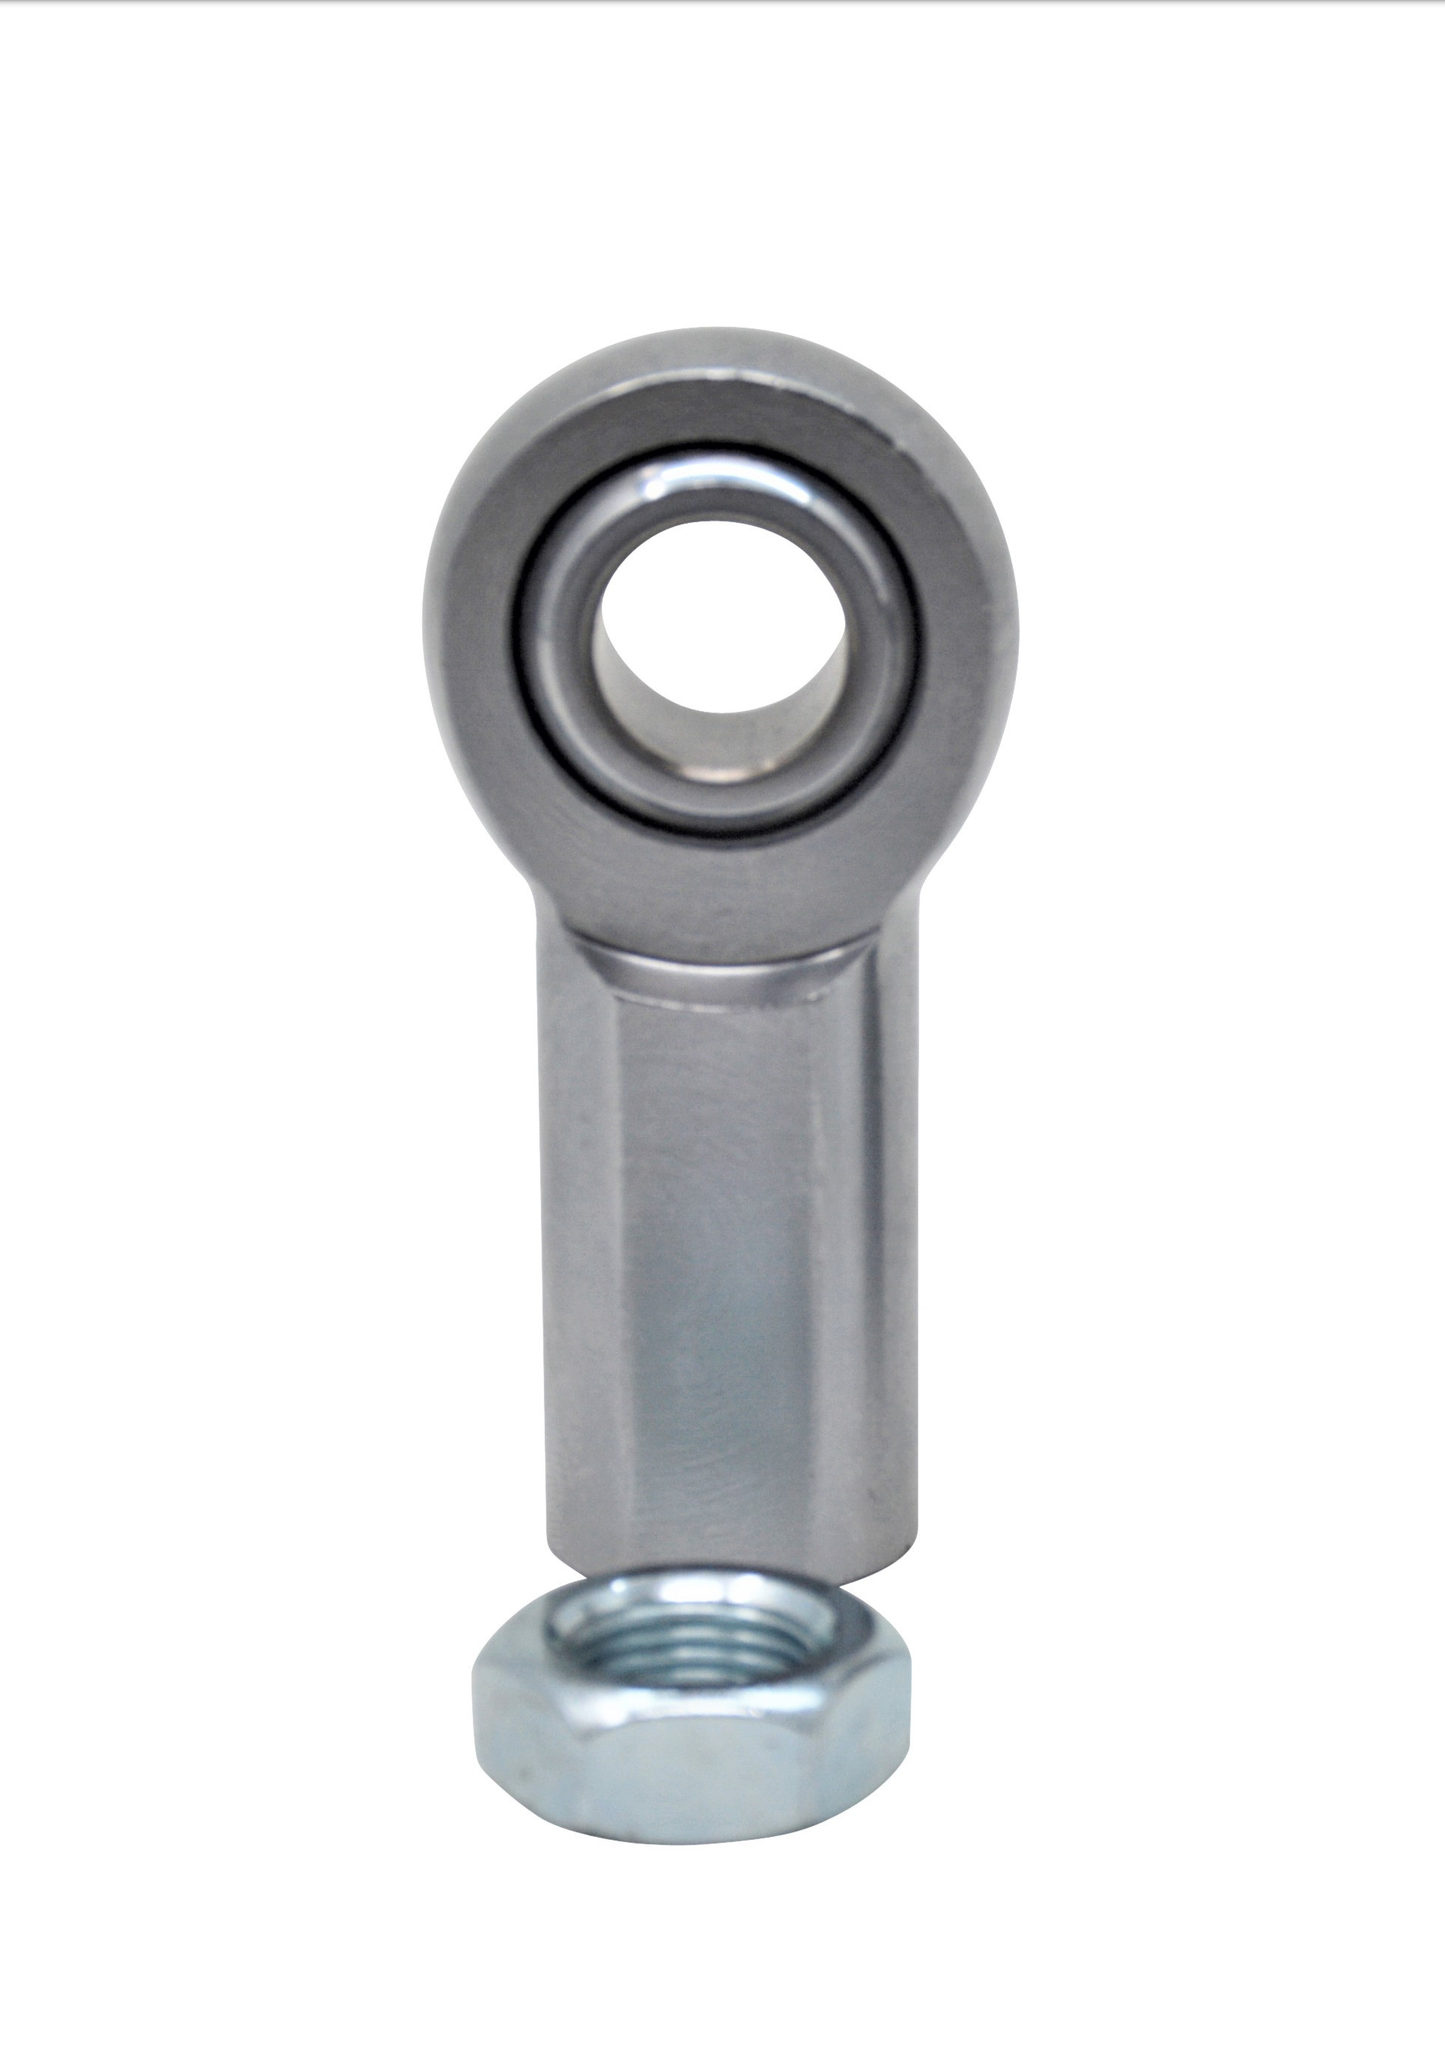 1/2" Female heim joint Right-hand (normal) thread, Heavy duty .500"